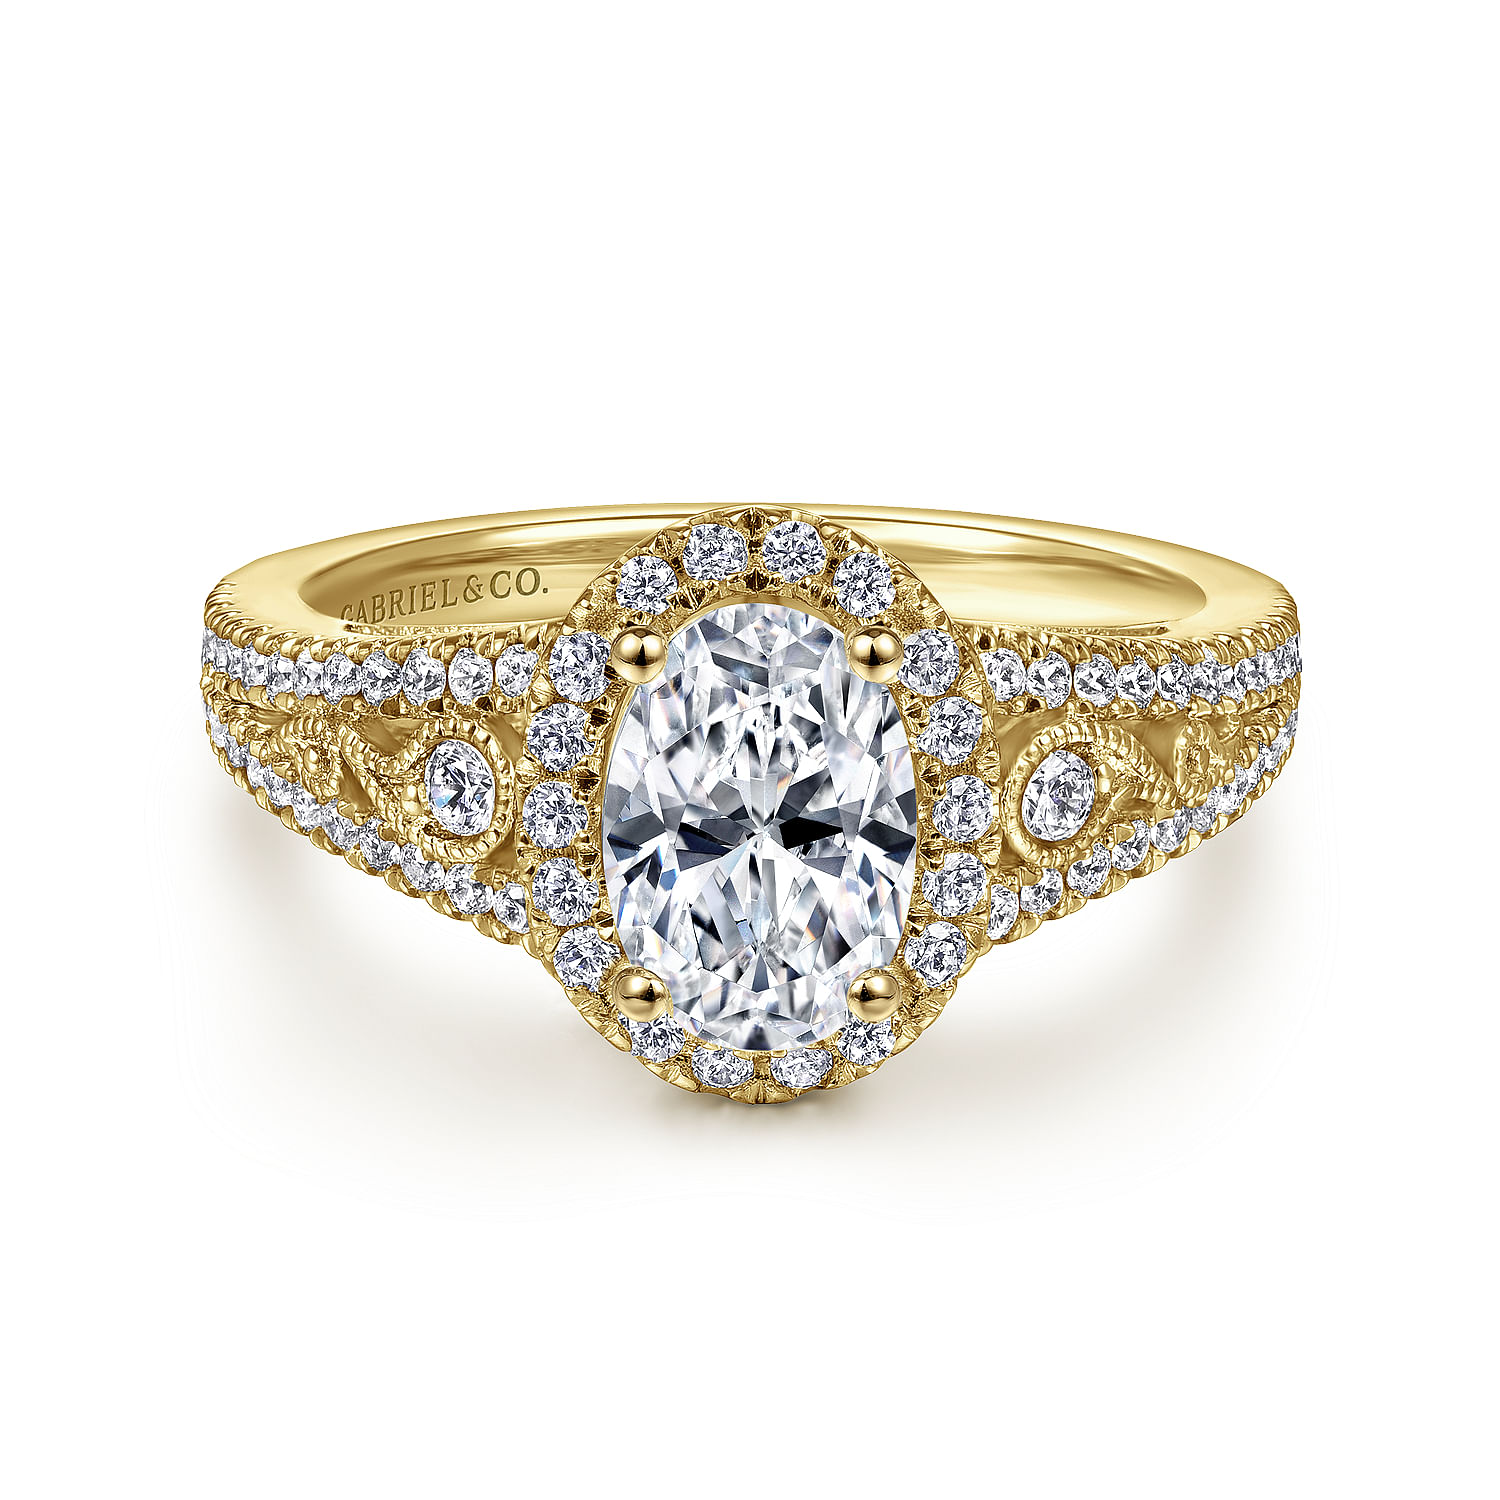 Gabriel - Vintage Inspired 14K Yellow Gold Oval Halo Diamond Engagement Ring